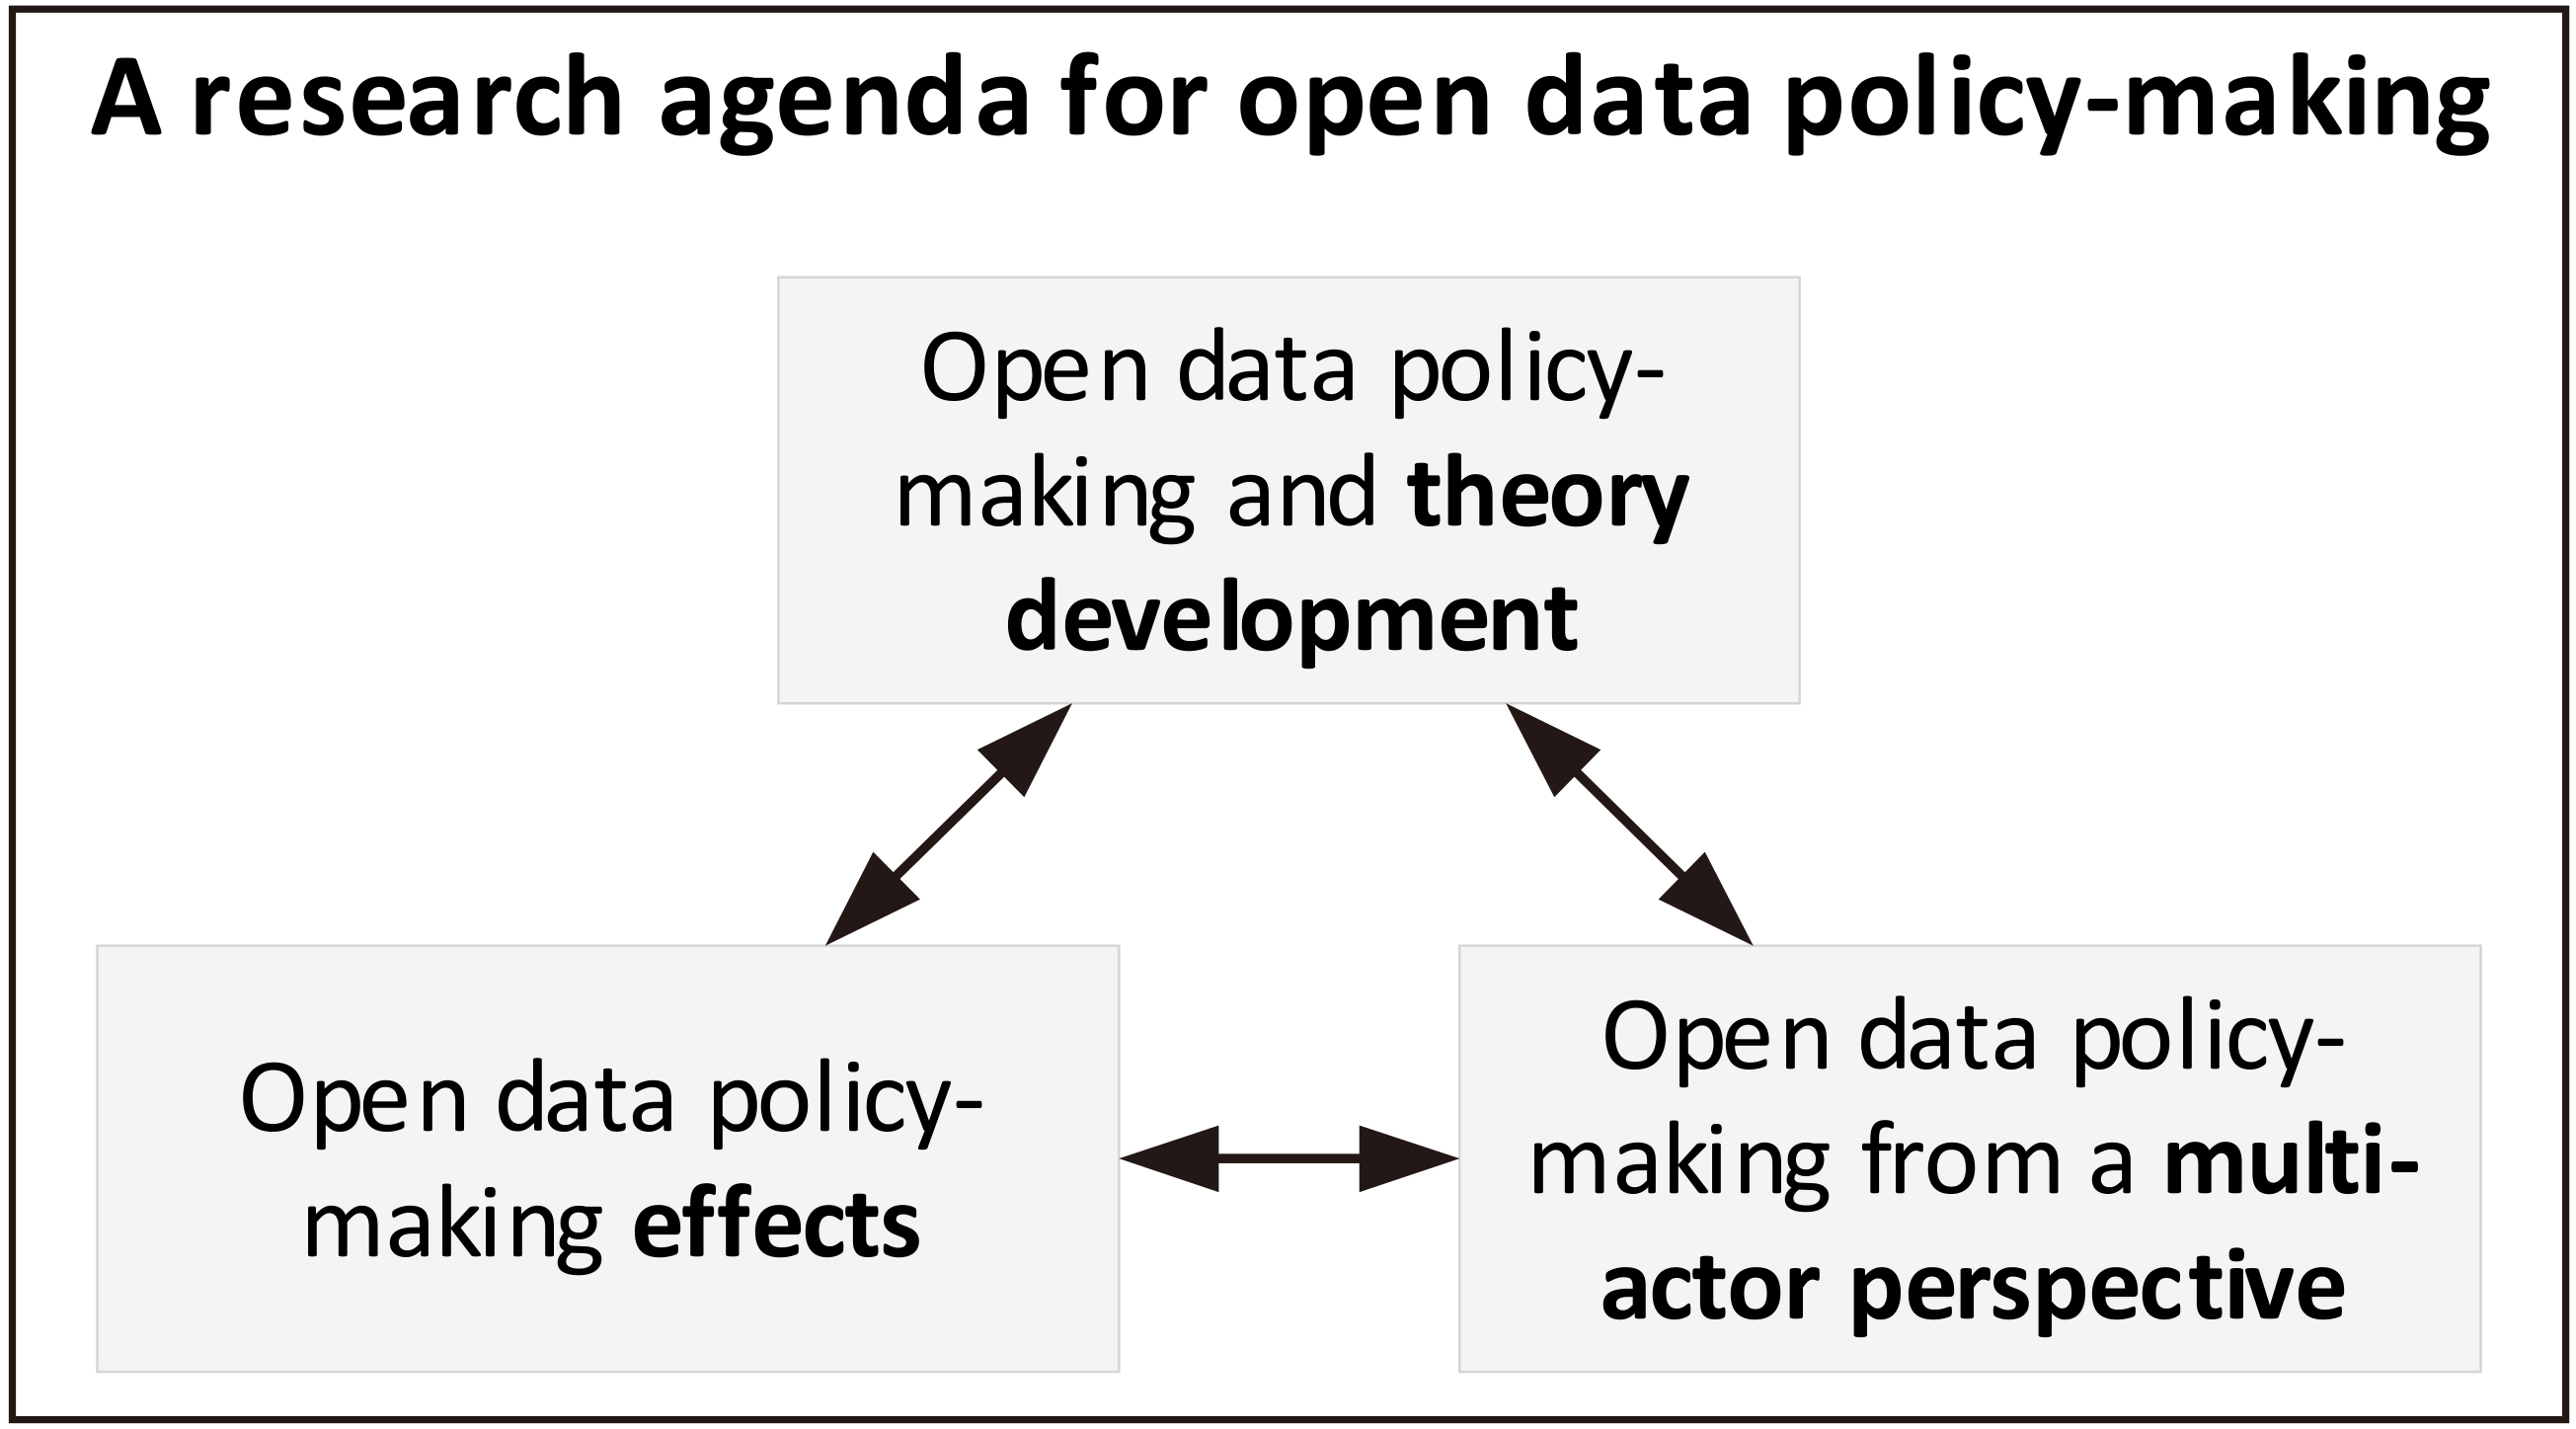 Proposed directions for open data policy-making research.